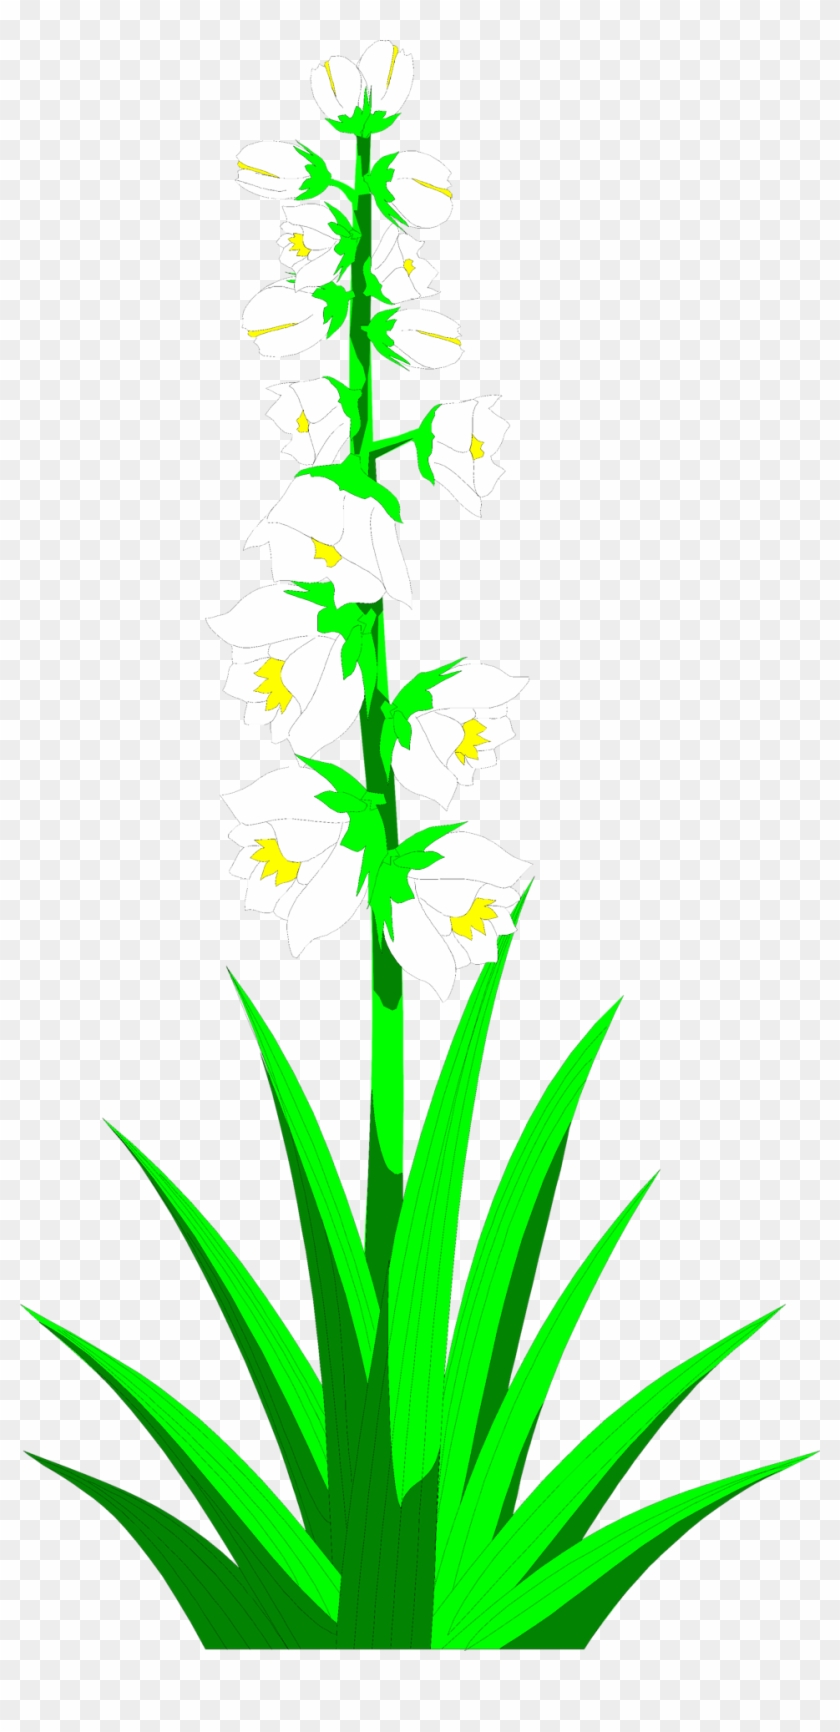 Yucca Plant Clipart Clipground Yucca Plant Clip Art Free Transparent Png Clipart Images Download